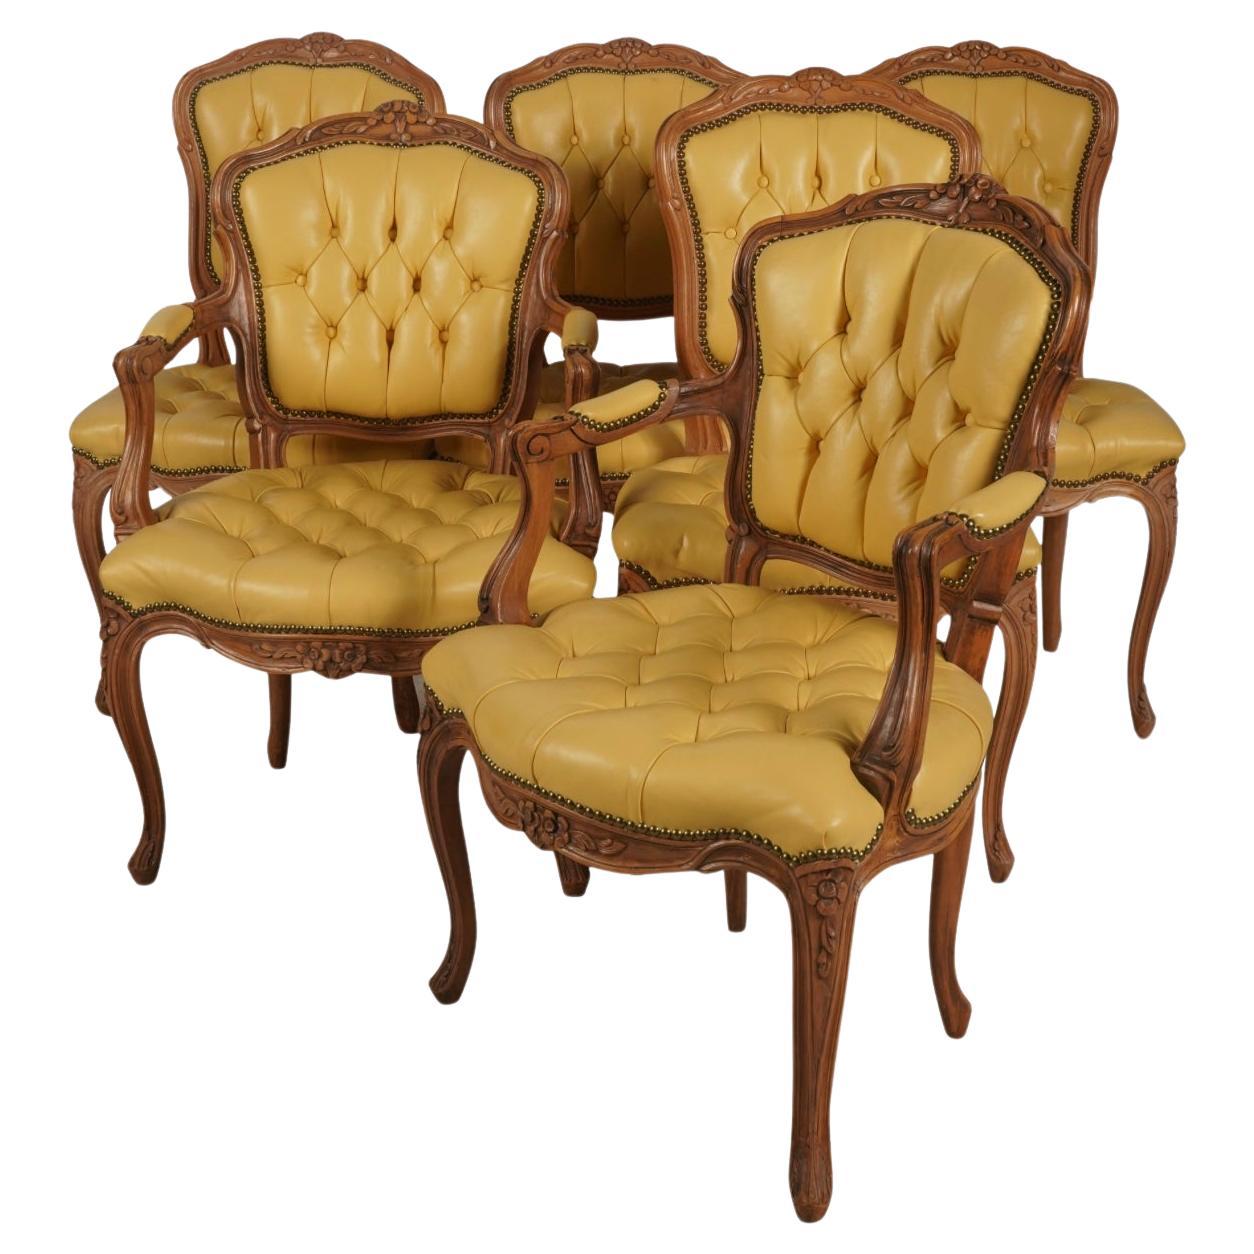 Set of 6 French Provincial Style Tufted Yellow Leather Arm Chair Fauteuils For Sale